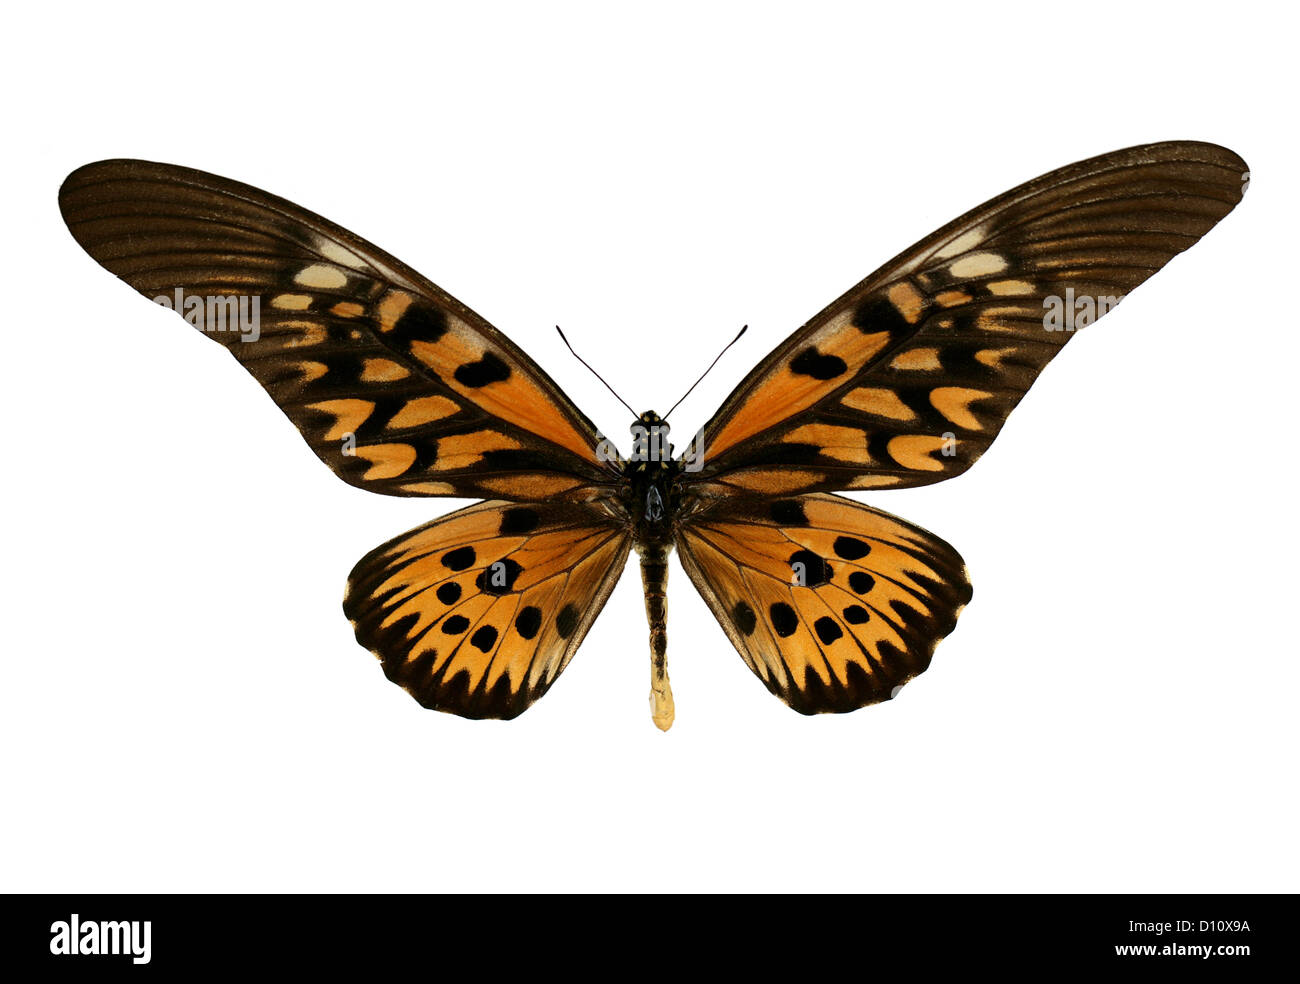 Giant African Swallowtail Butterfly, Papilio antimachus, Papilionidae. Africa. Stock Photo